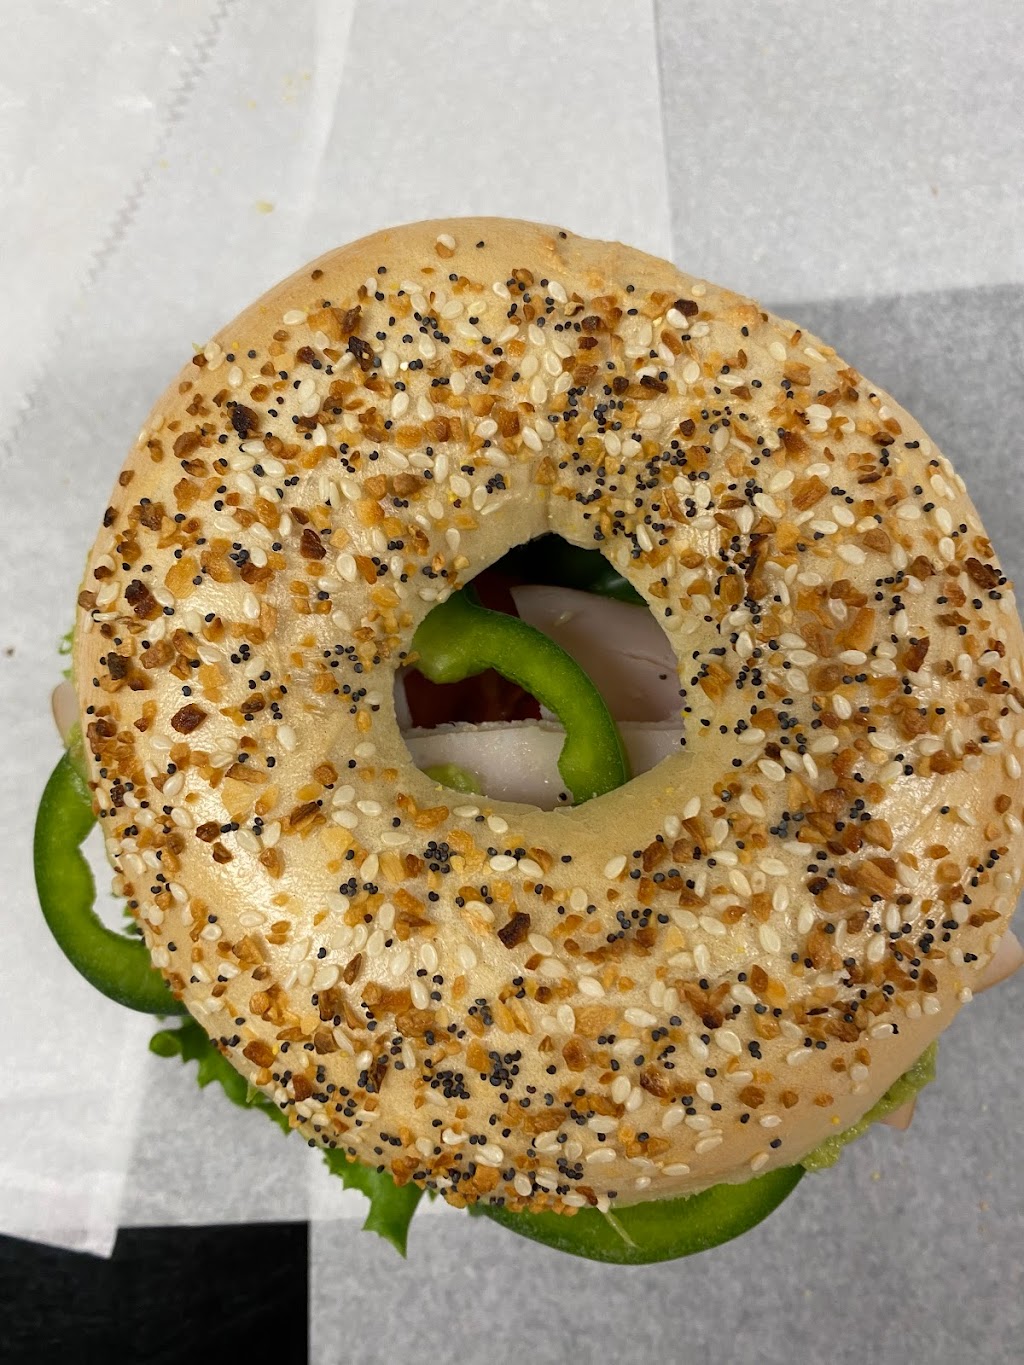 Big Apple Bagels | 3137 Dundee Rd, Northbrook, IL 60062 | Phone: (847) 498-7850